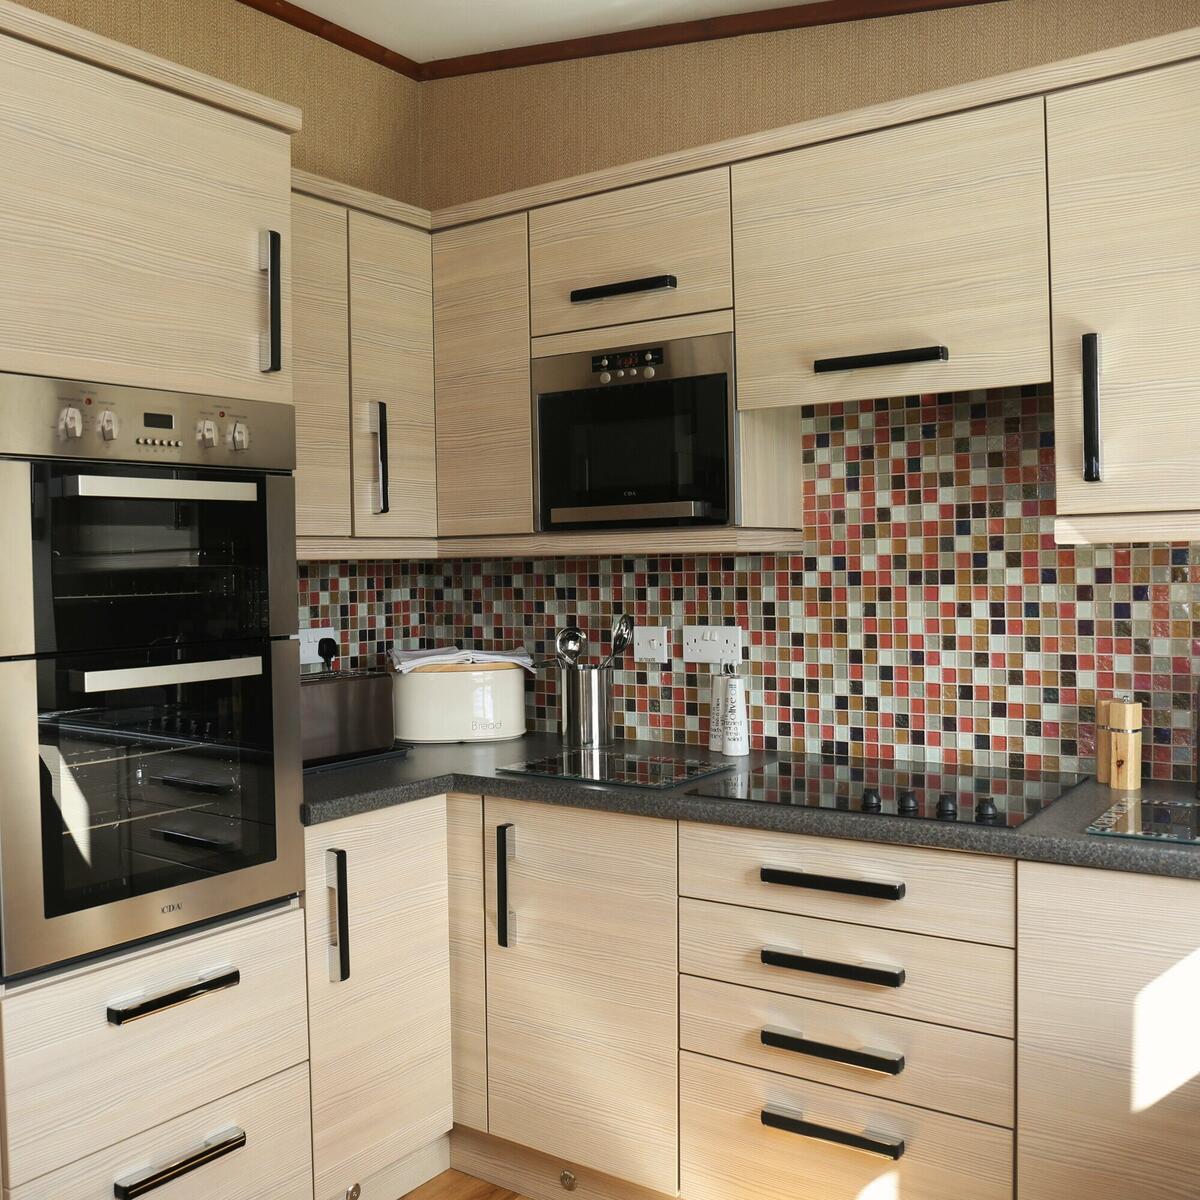 Self contained, fully equipped kitchen in each property